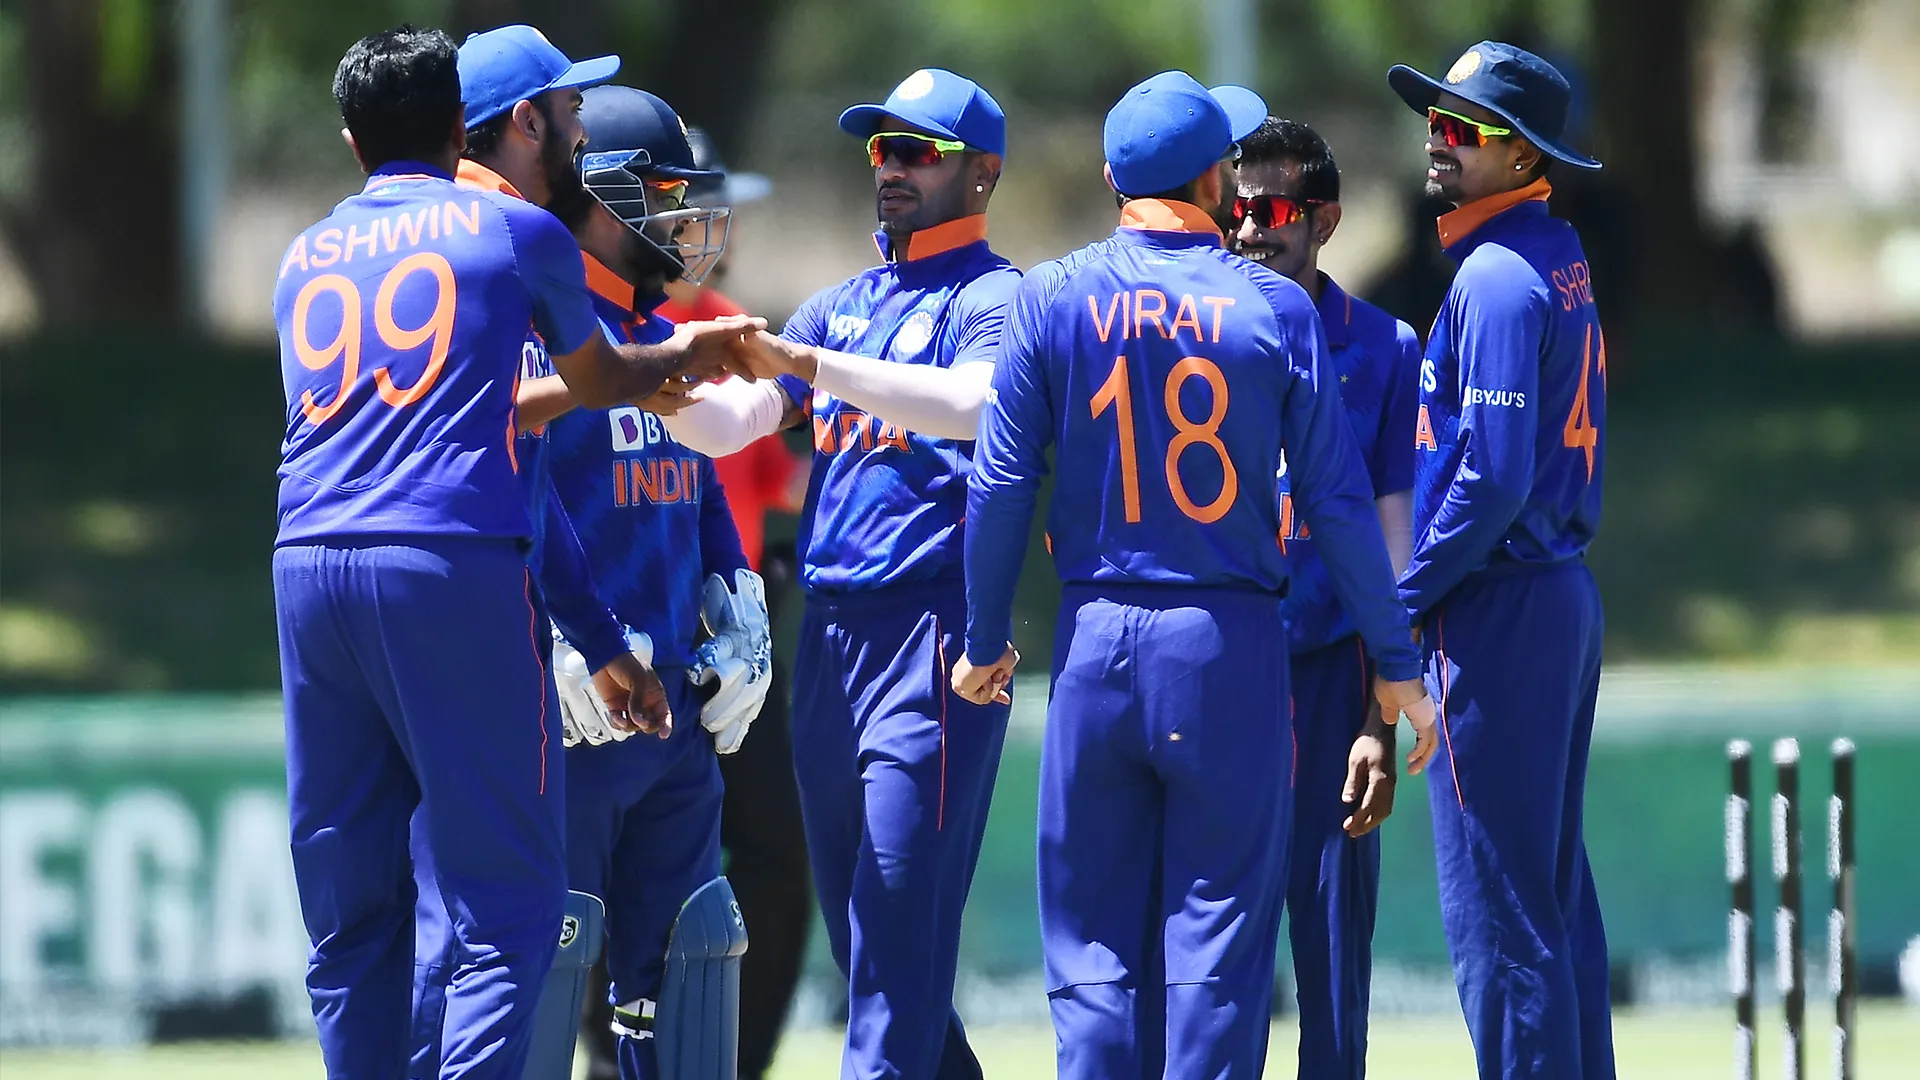 India announced their all-format tour of South Africa squads